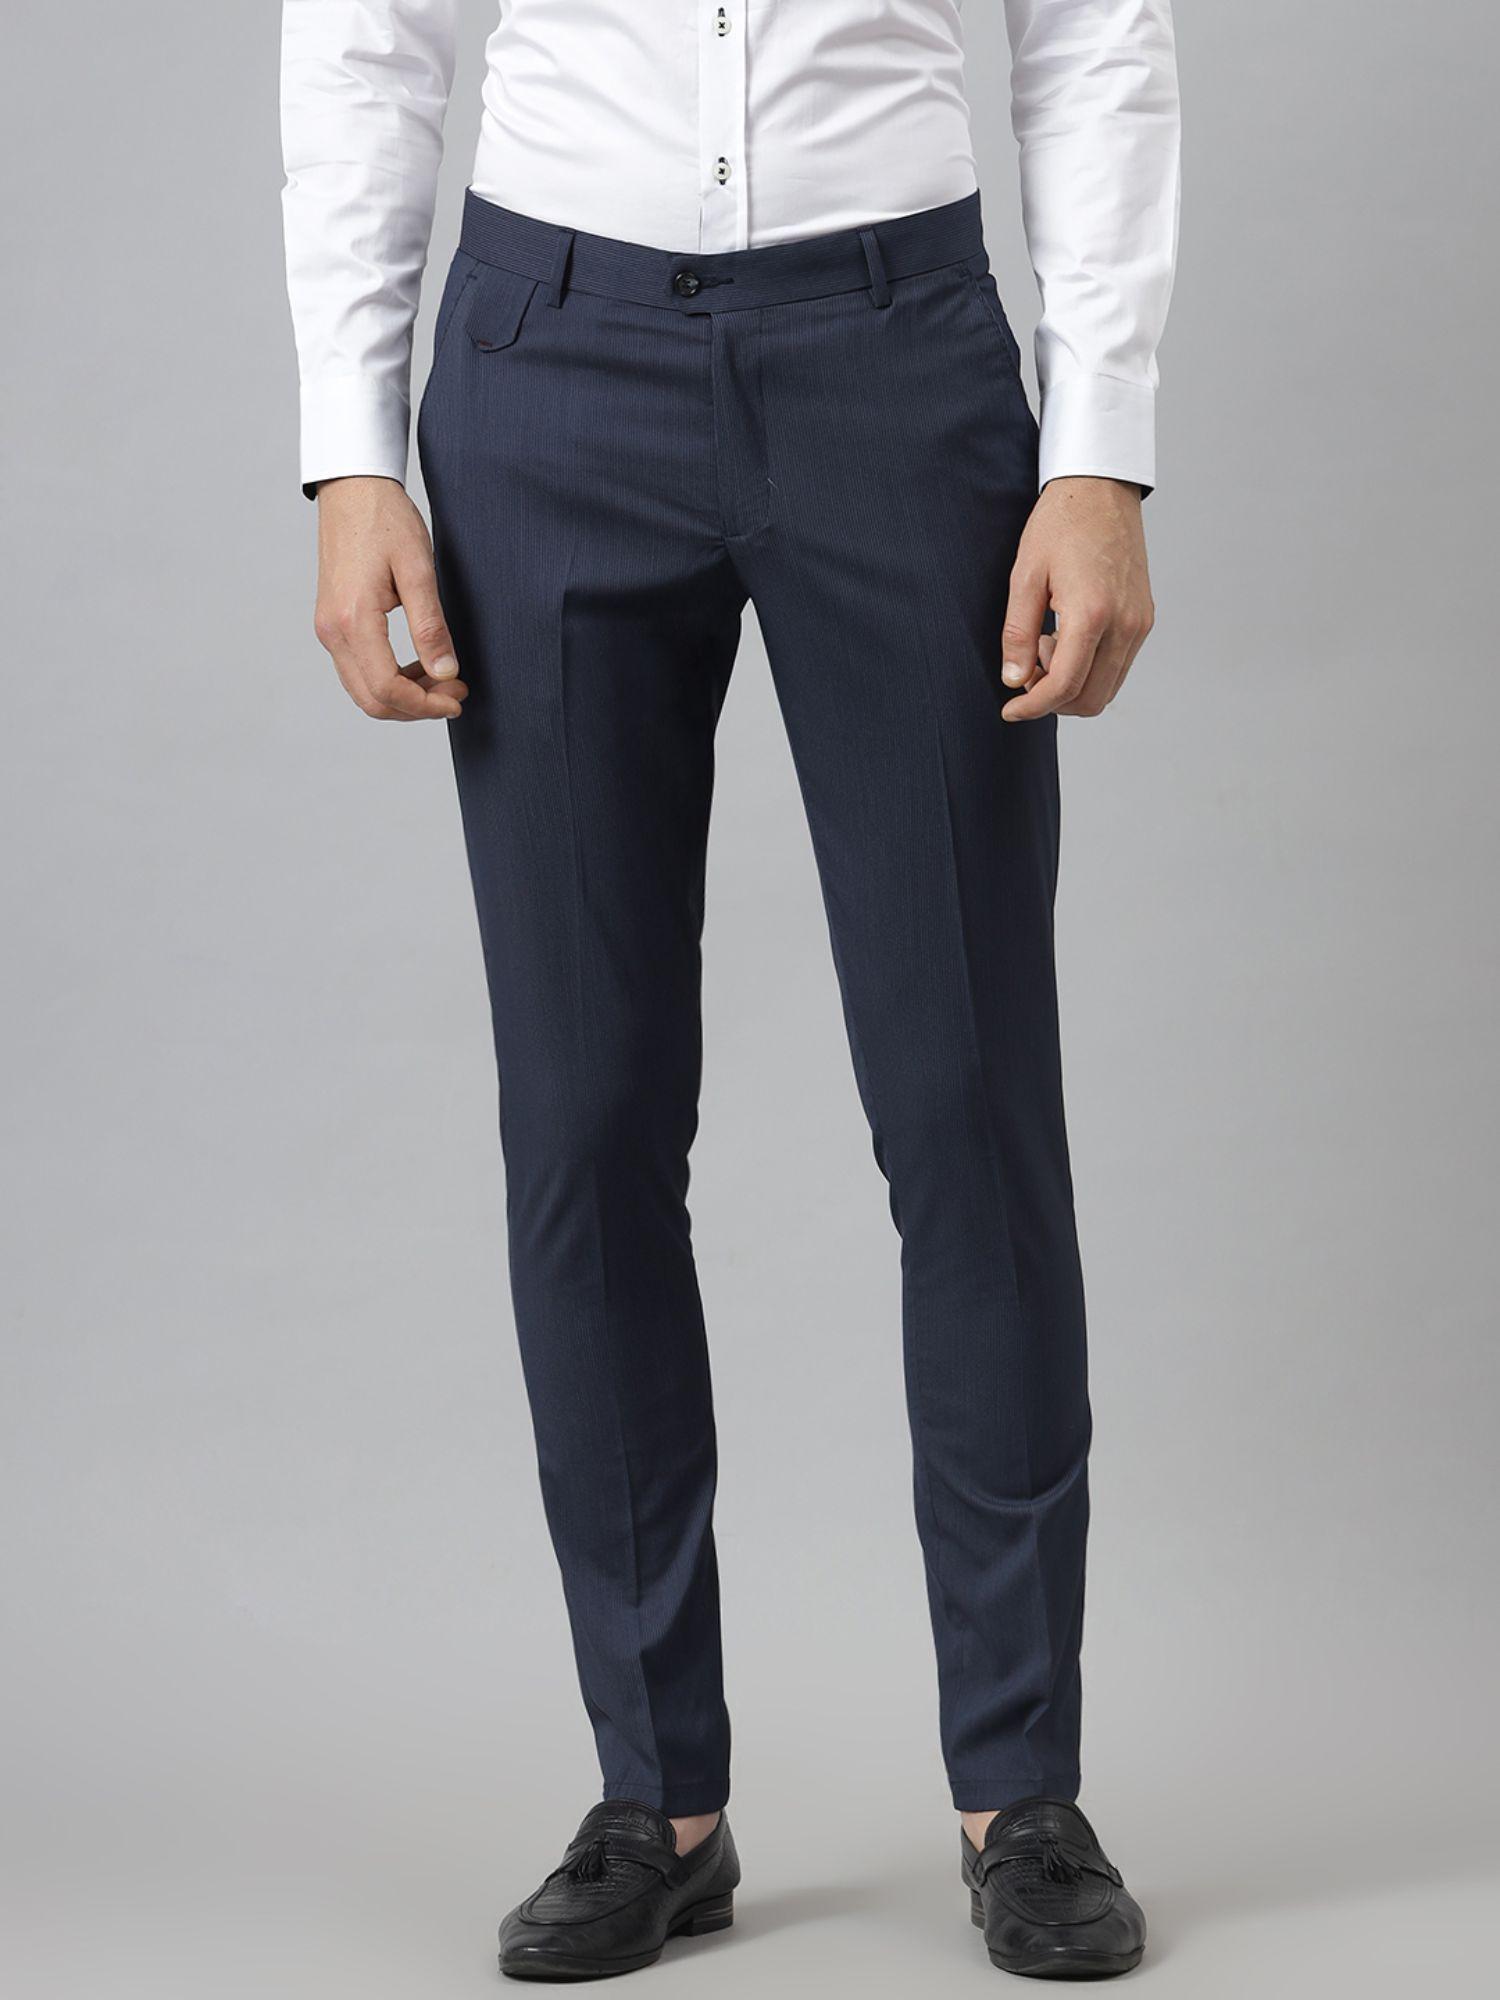 blue-viscose-rayon-solid-formal-trouser